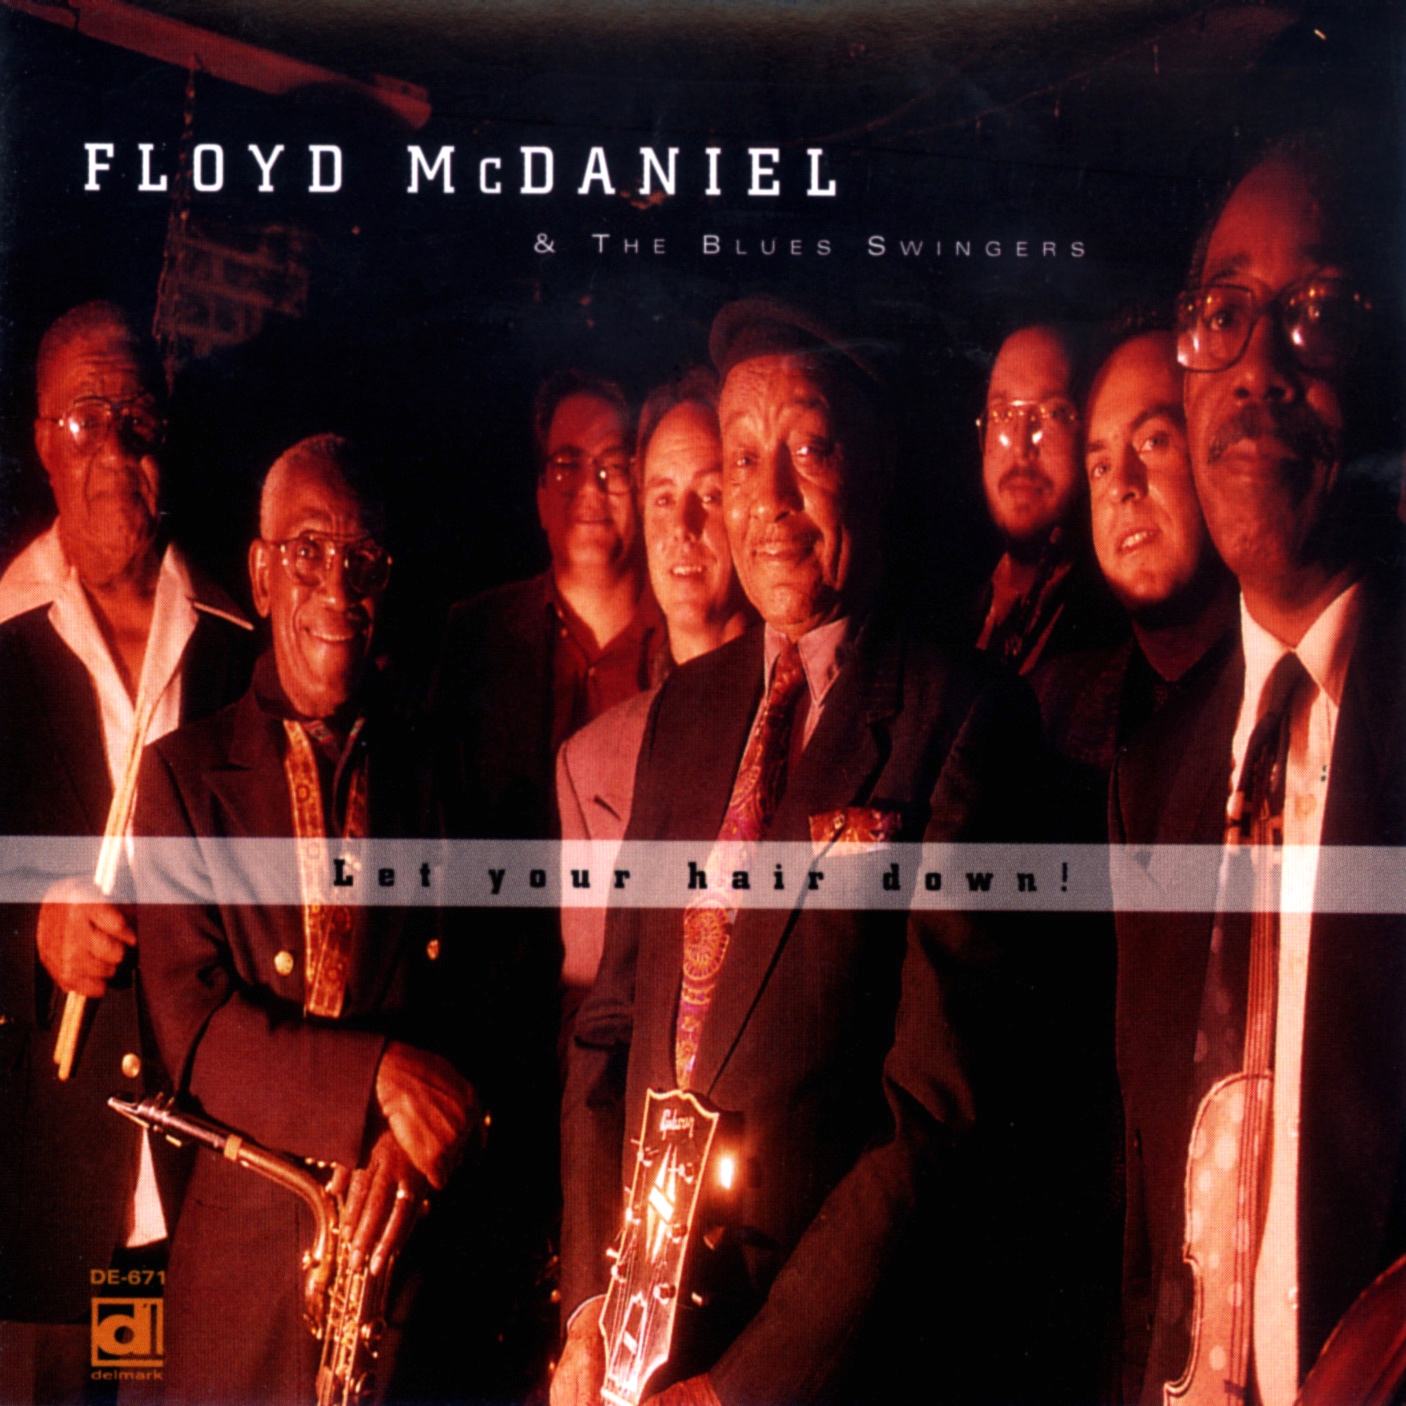 Floyd McDaniel and The Blues Swingers – Let Your Hair Down! Adult Picture